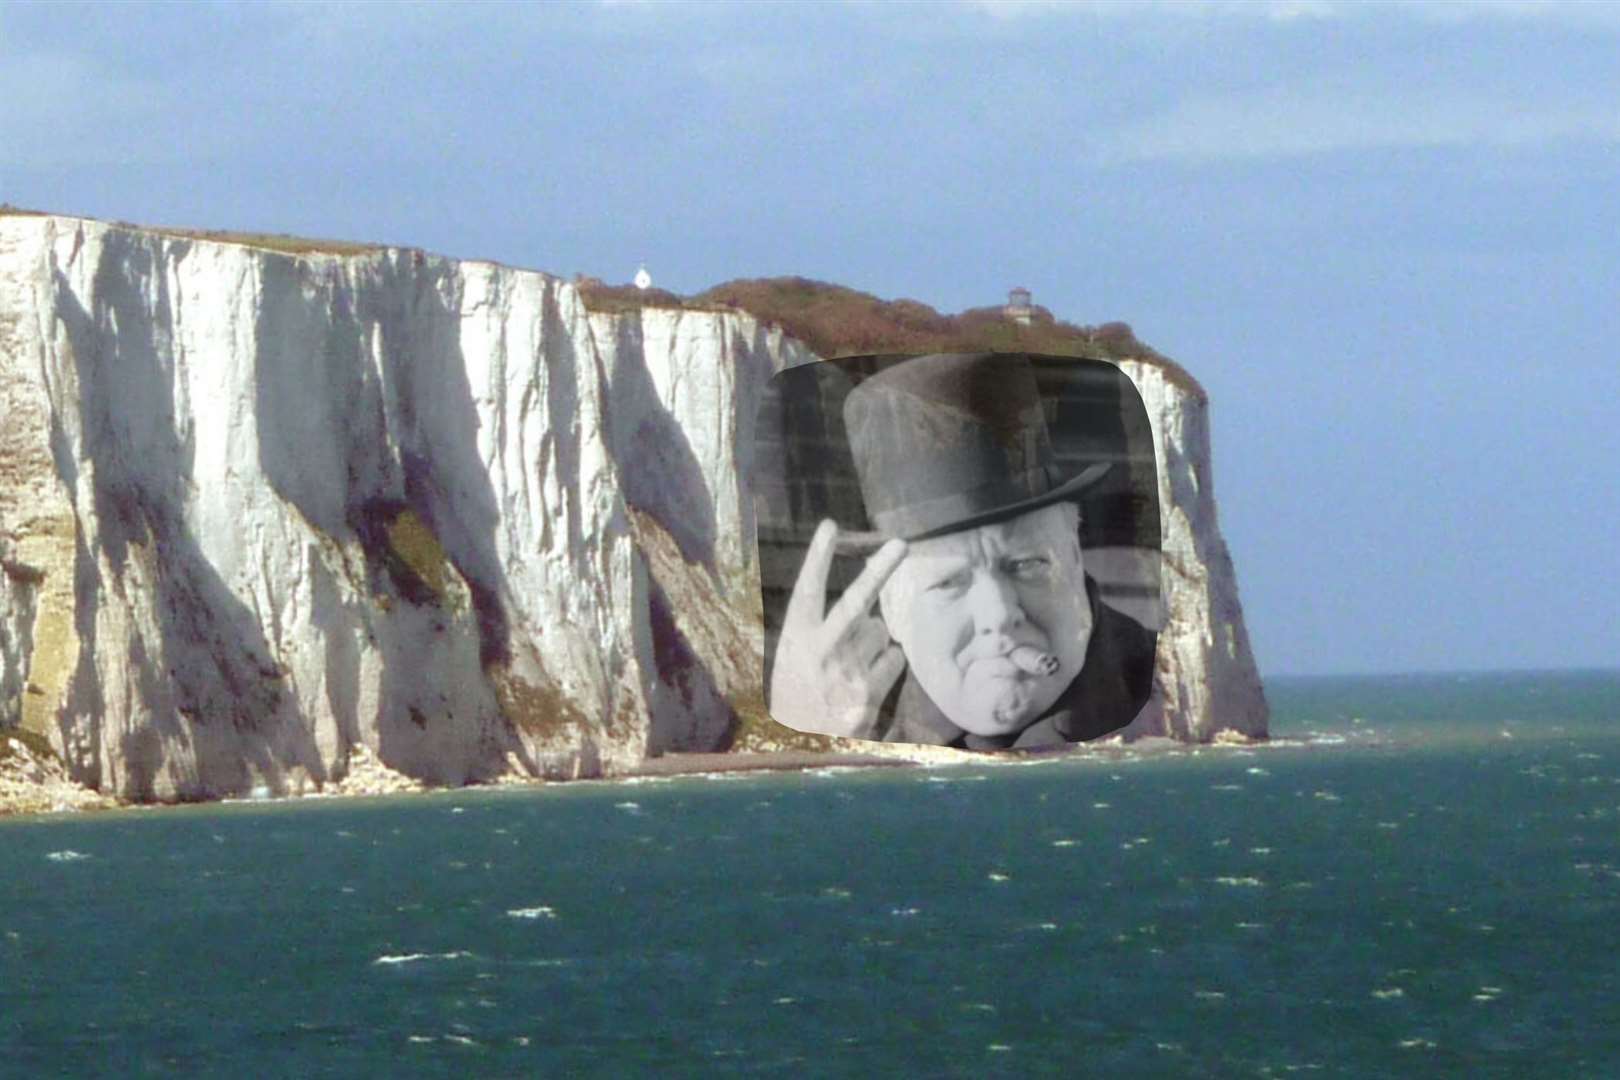 How the carving of Churchill on the White Cliffs might have looked, maybe